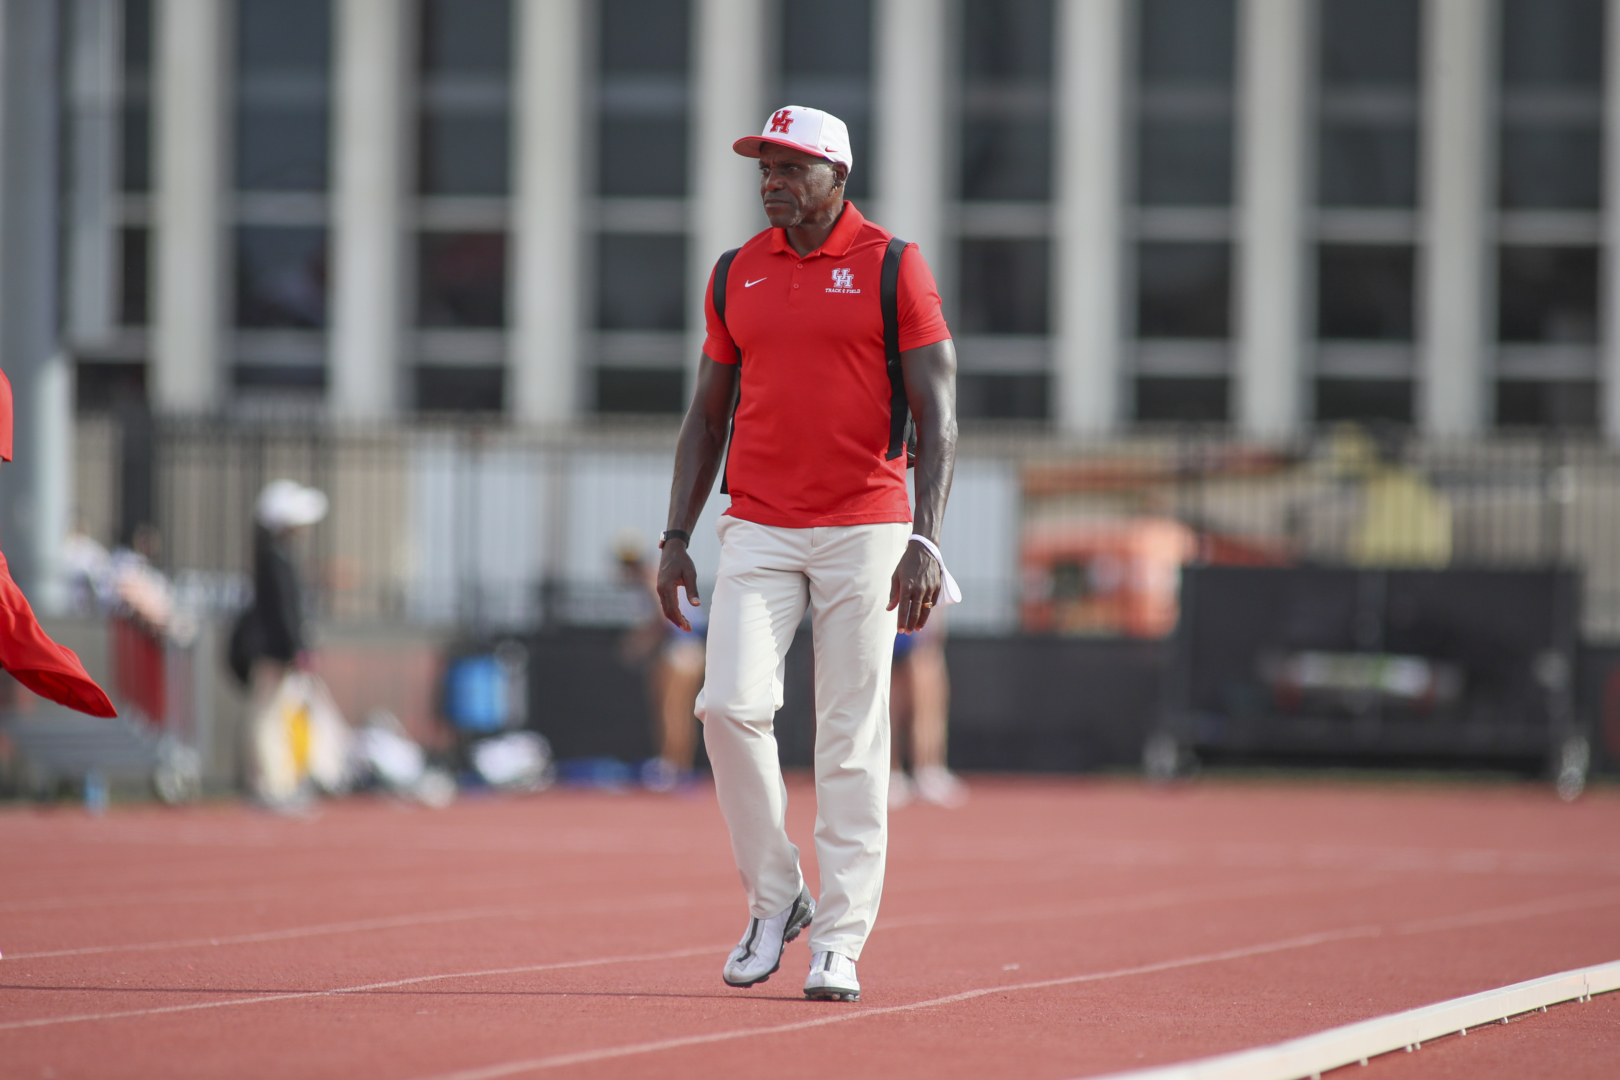 Carl Lewis, one of the most decorated track athletes of all-time and UH alumnus, was named the UH track and field program's new head coach. | Courtesy of UH athletics